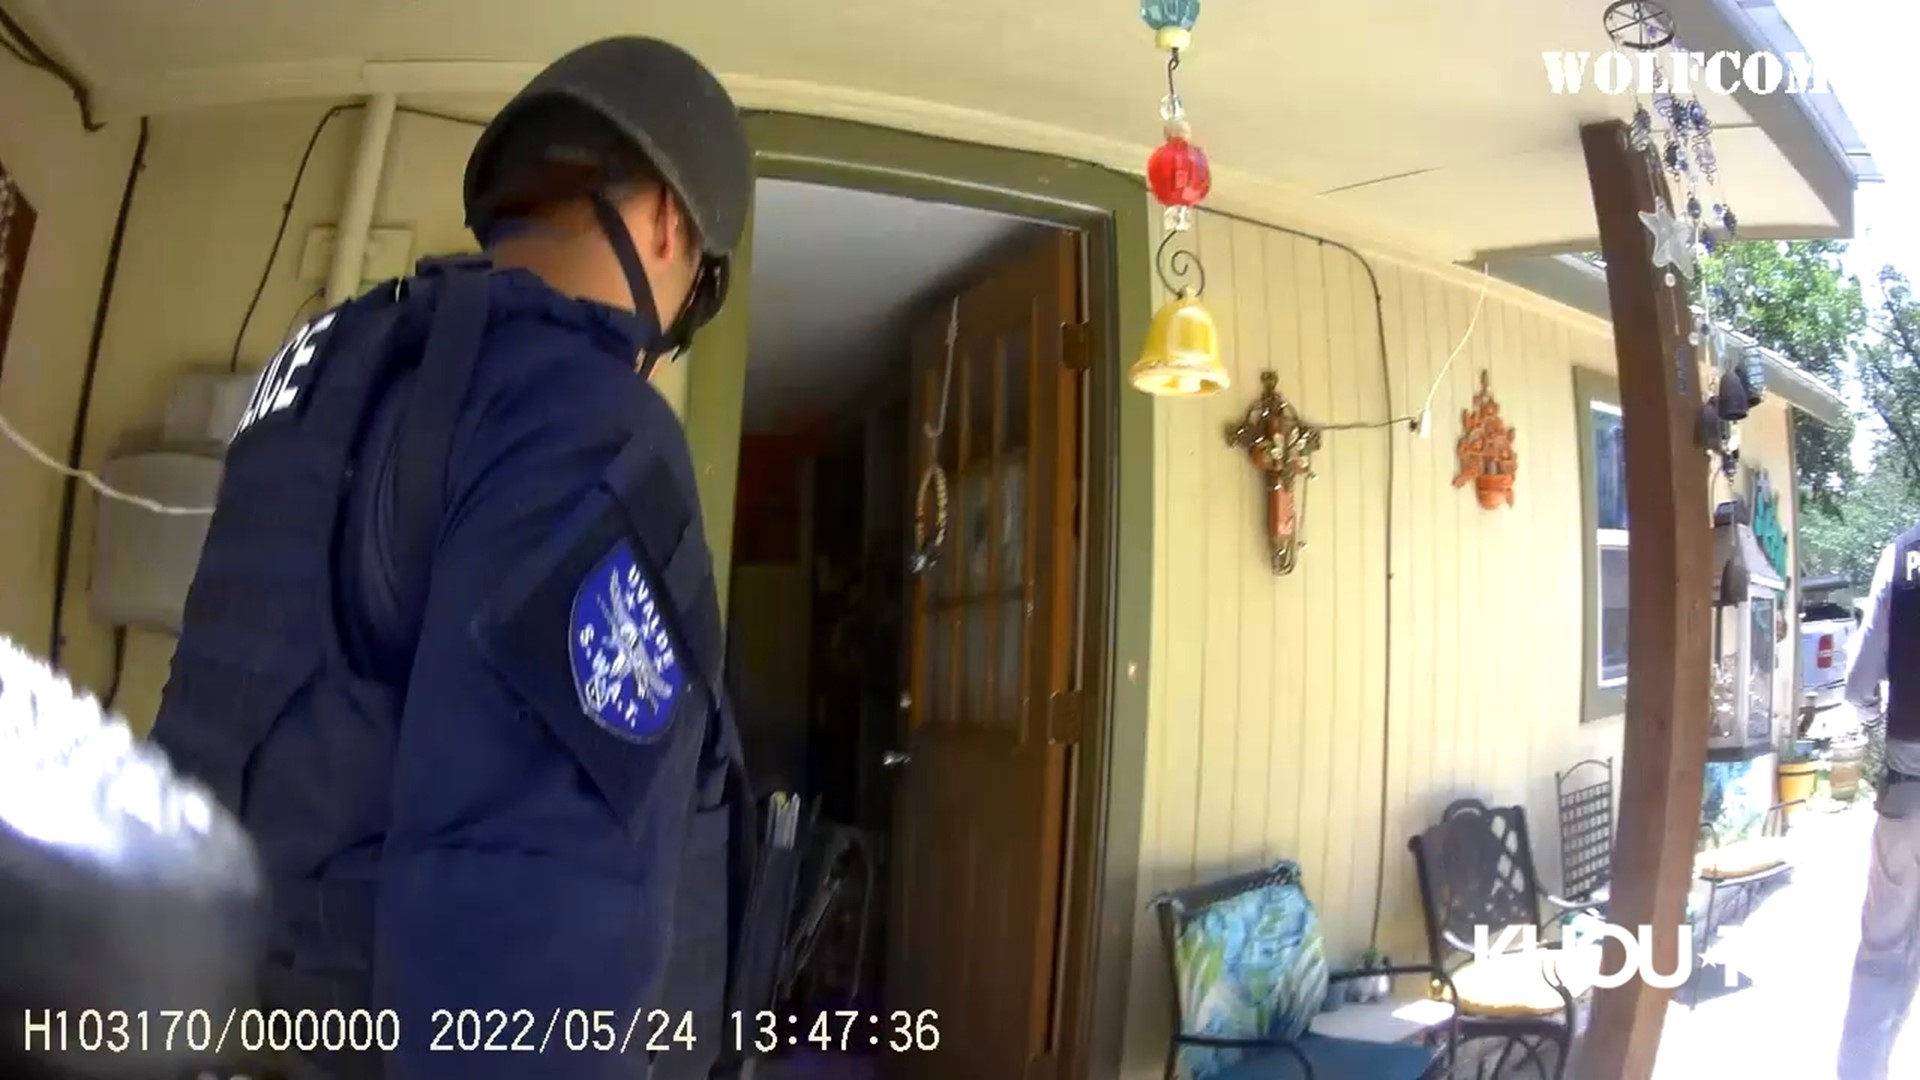 In his footage, Zamora can be seen entering the home of the shooter as the voice of a woman shouting can be heard in the background.